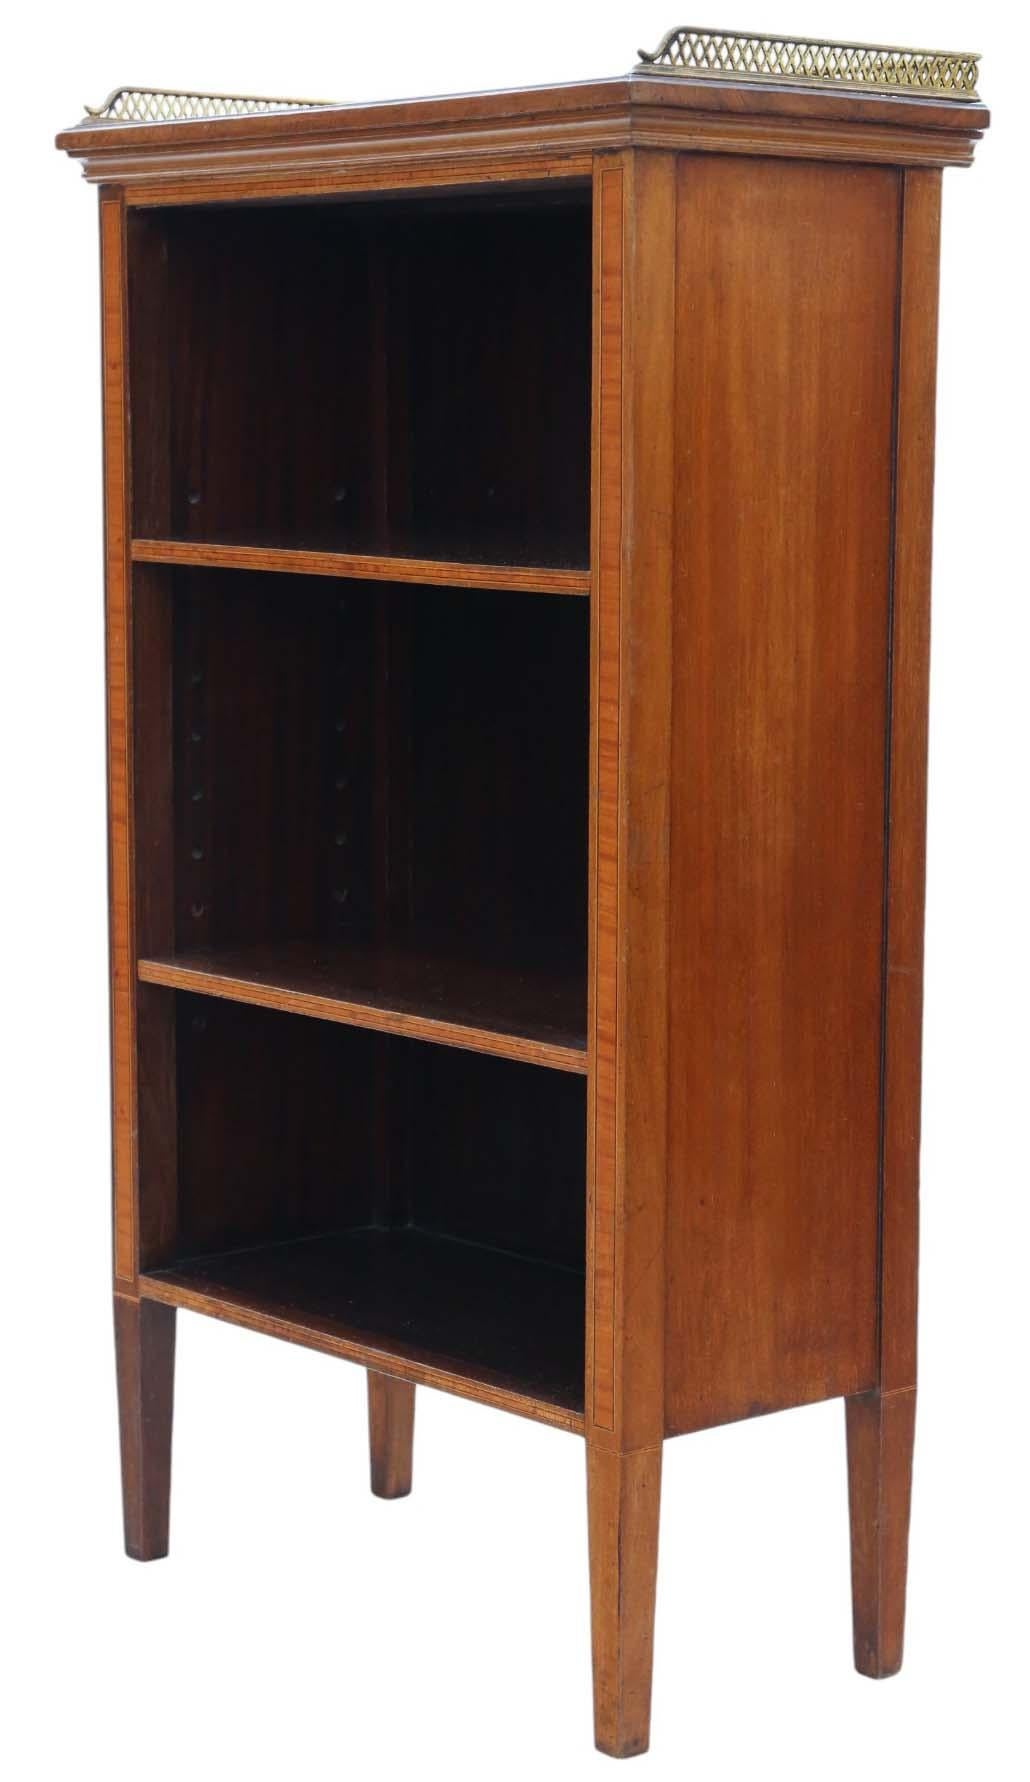 Early 20th Century Antique C1900 Inlaid Mahogany Adjustable Bookcase Display Cabinet - Fine Quality For Sale